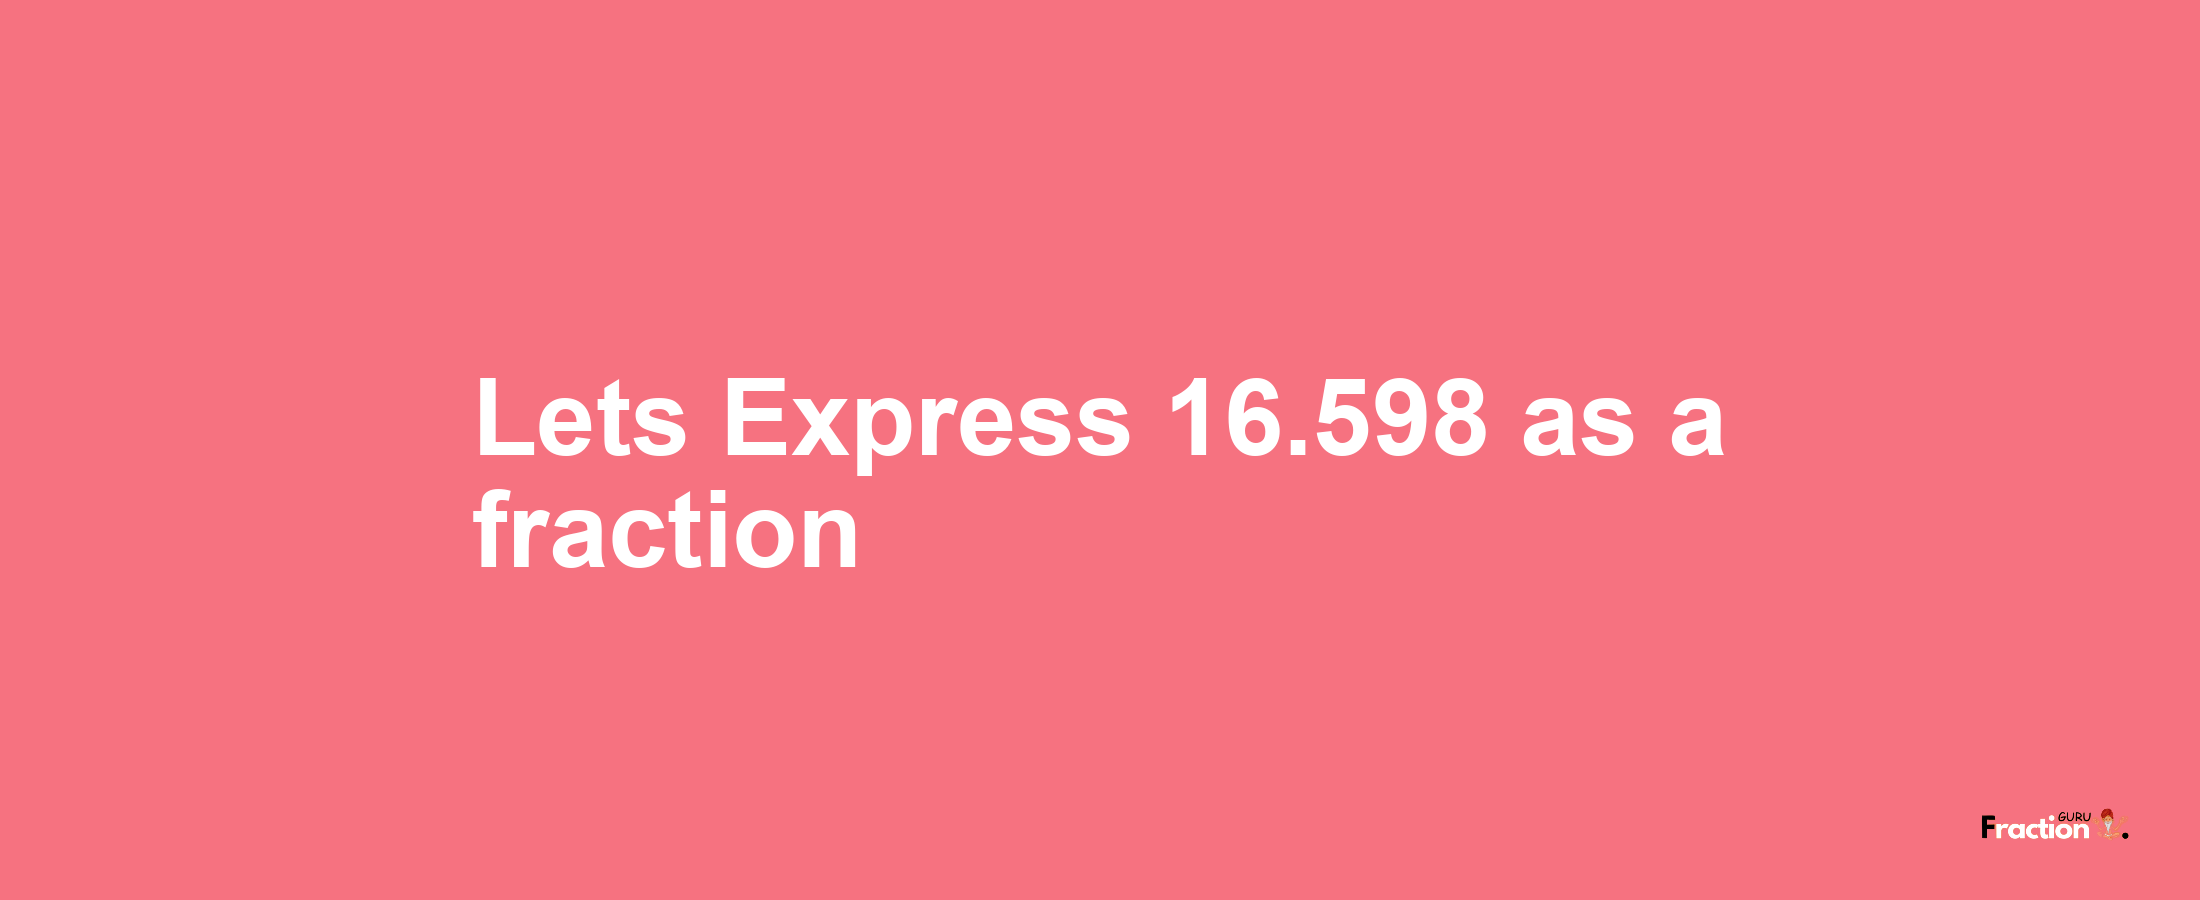 Lets Express 16.598 as afraction